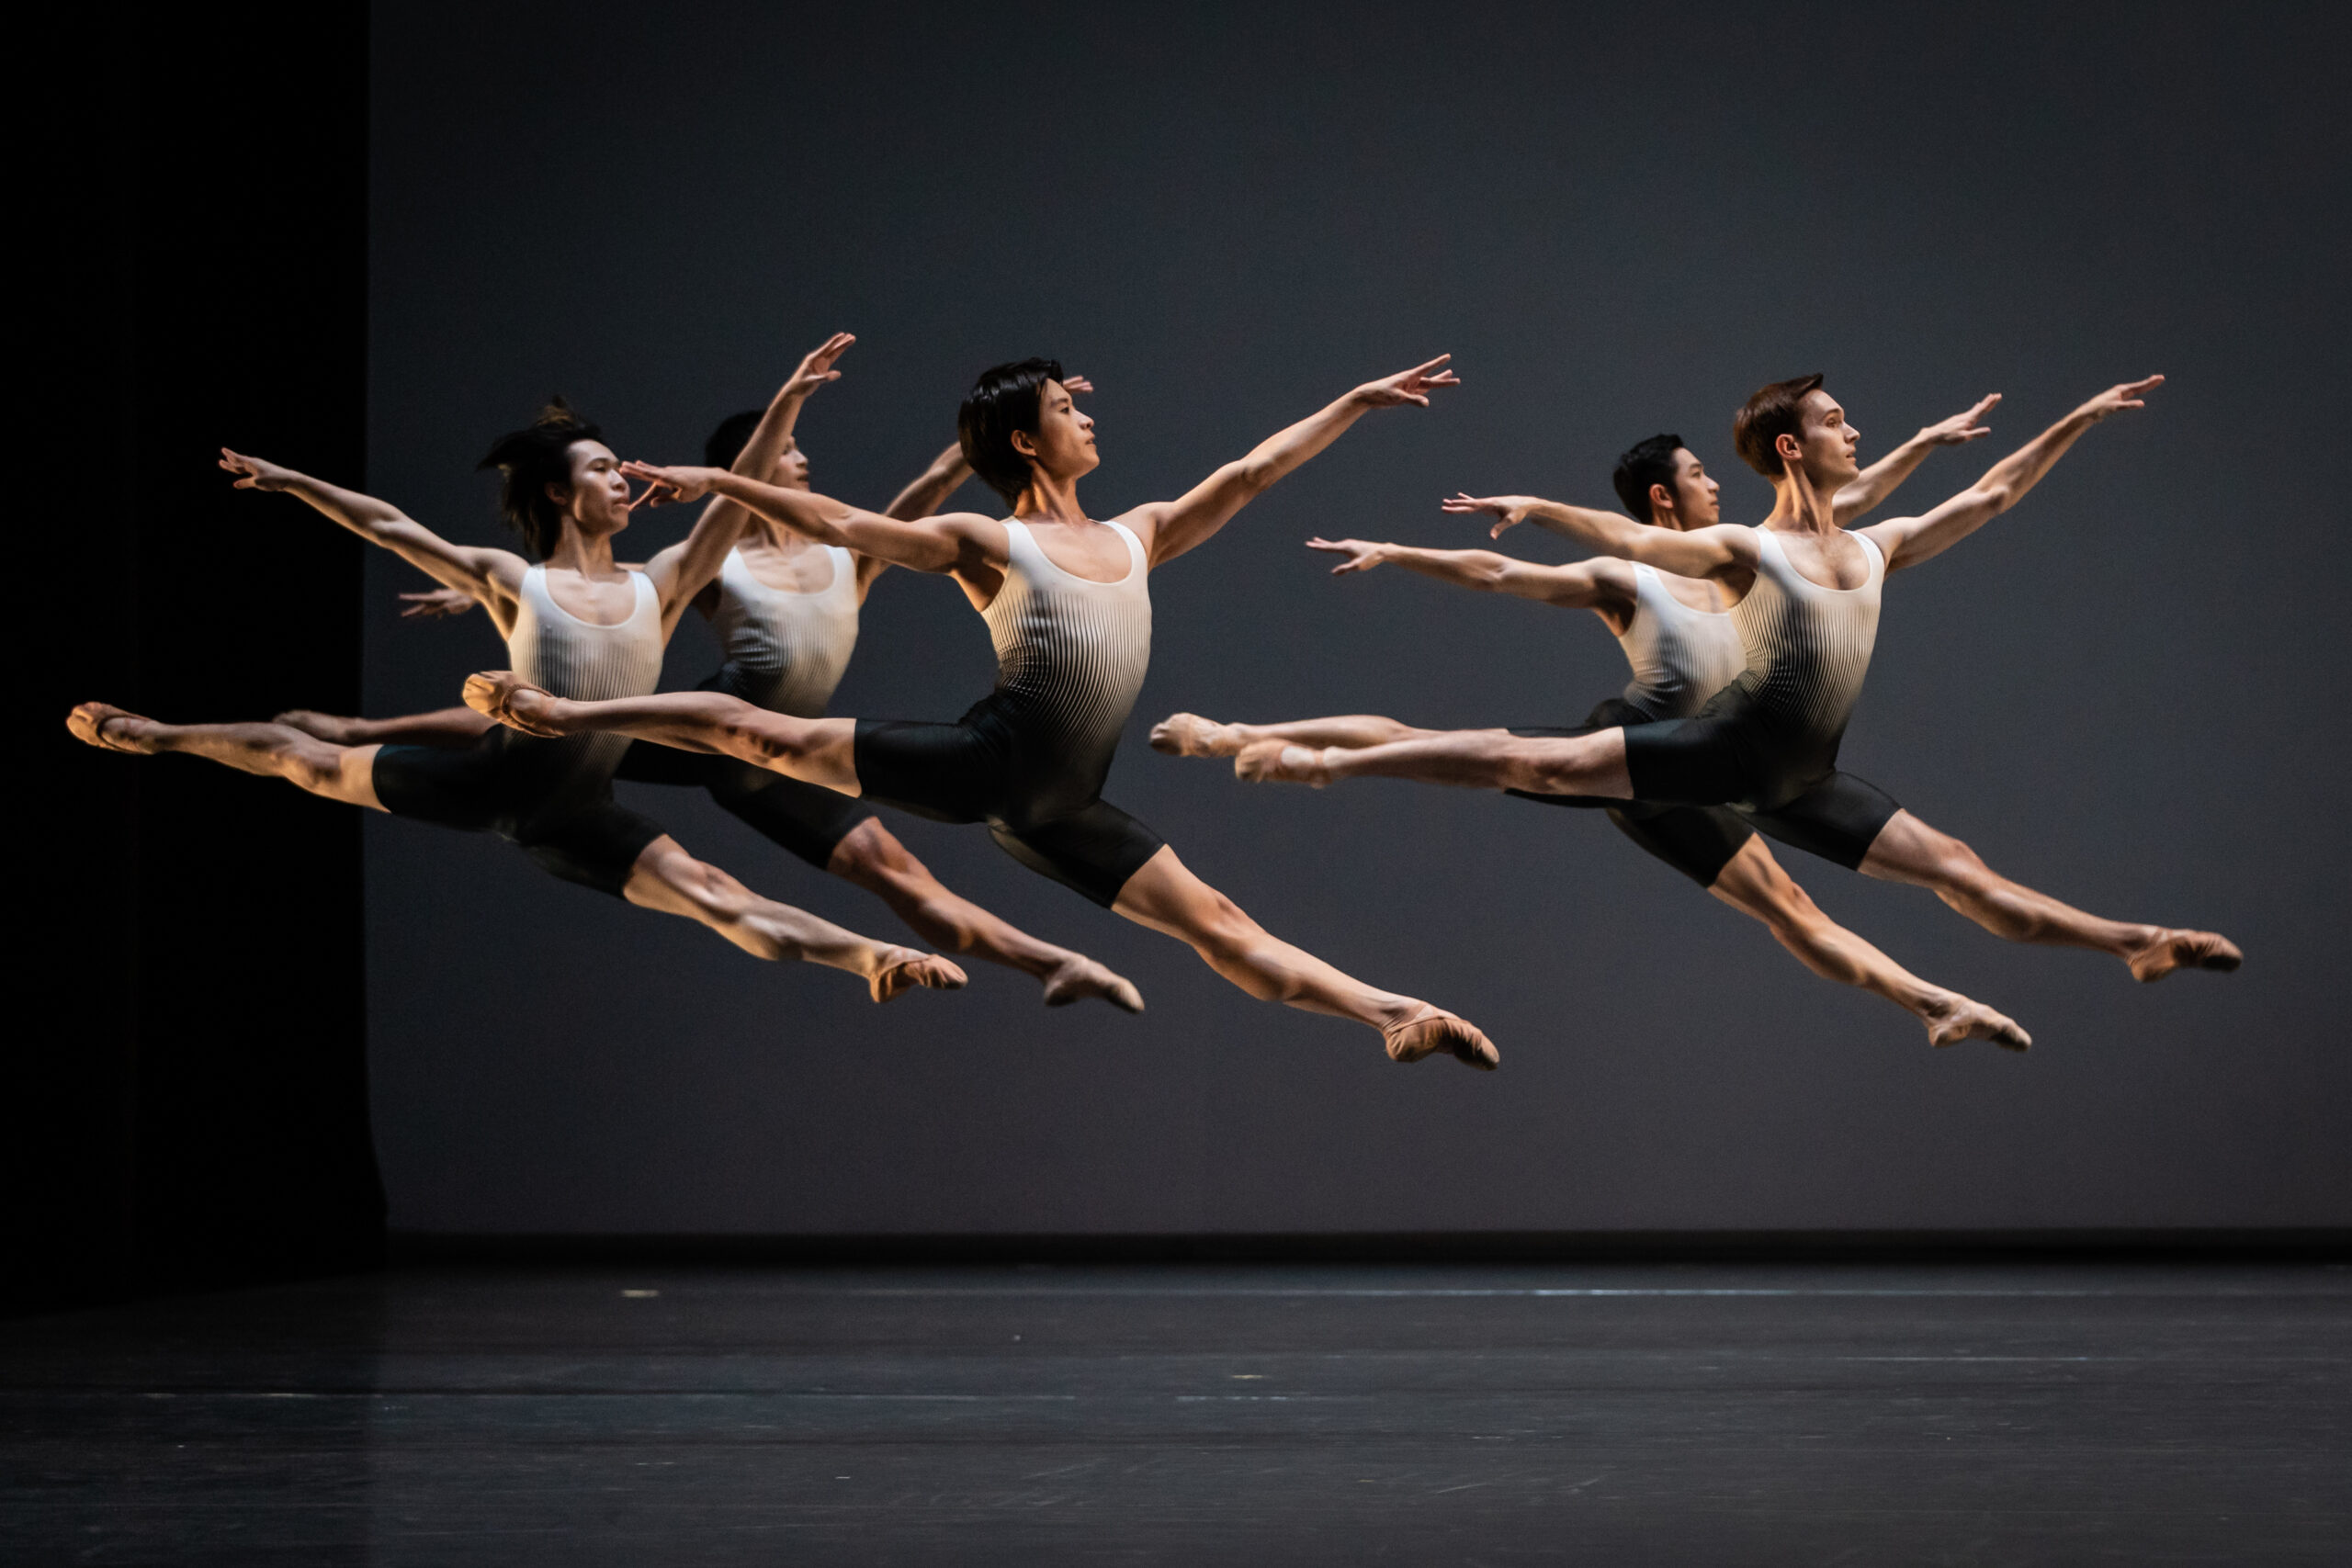 Six male members of Singapore Ballet are suspended mid-air in a split sissonne, wearing ombre white-to-grey biketards.